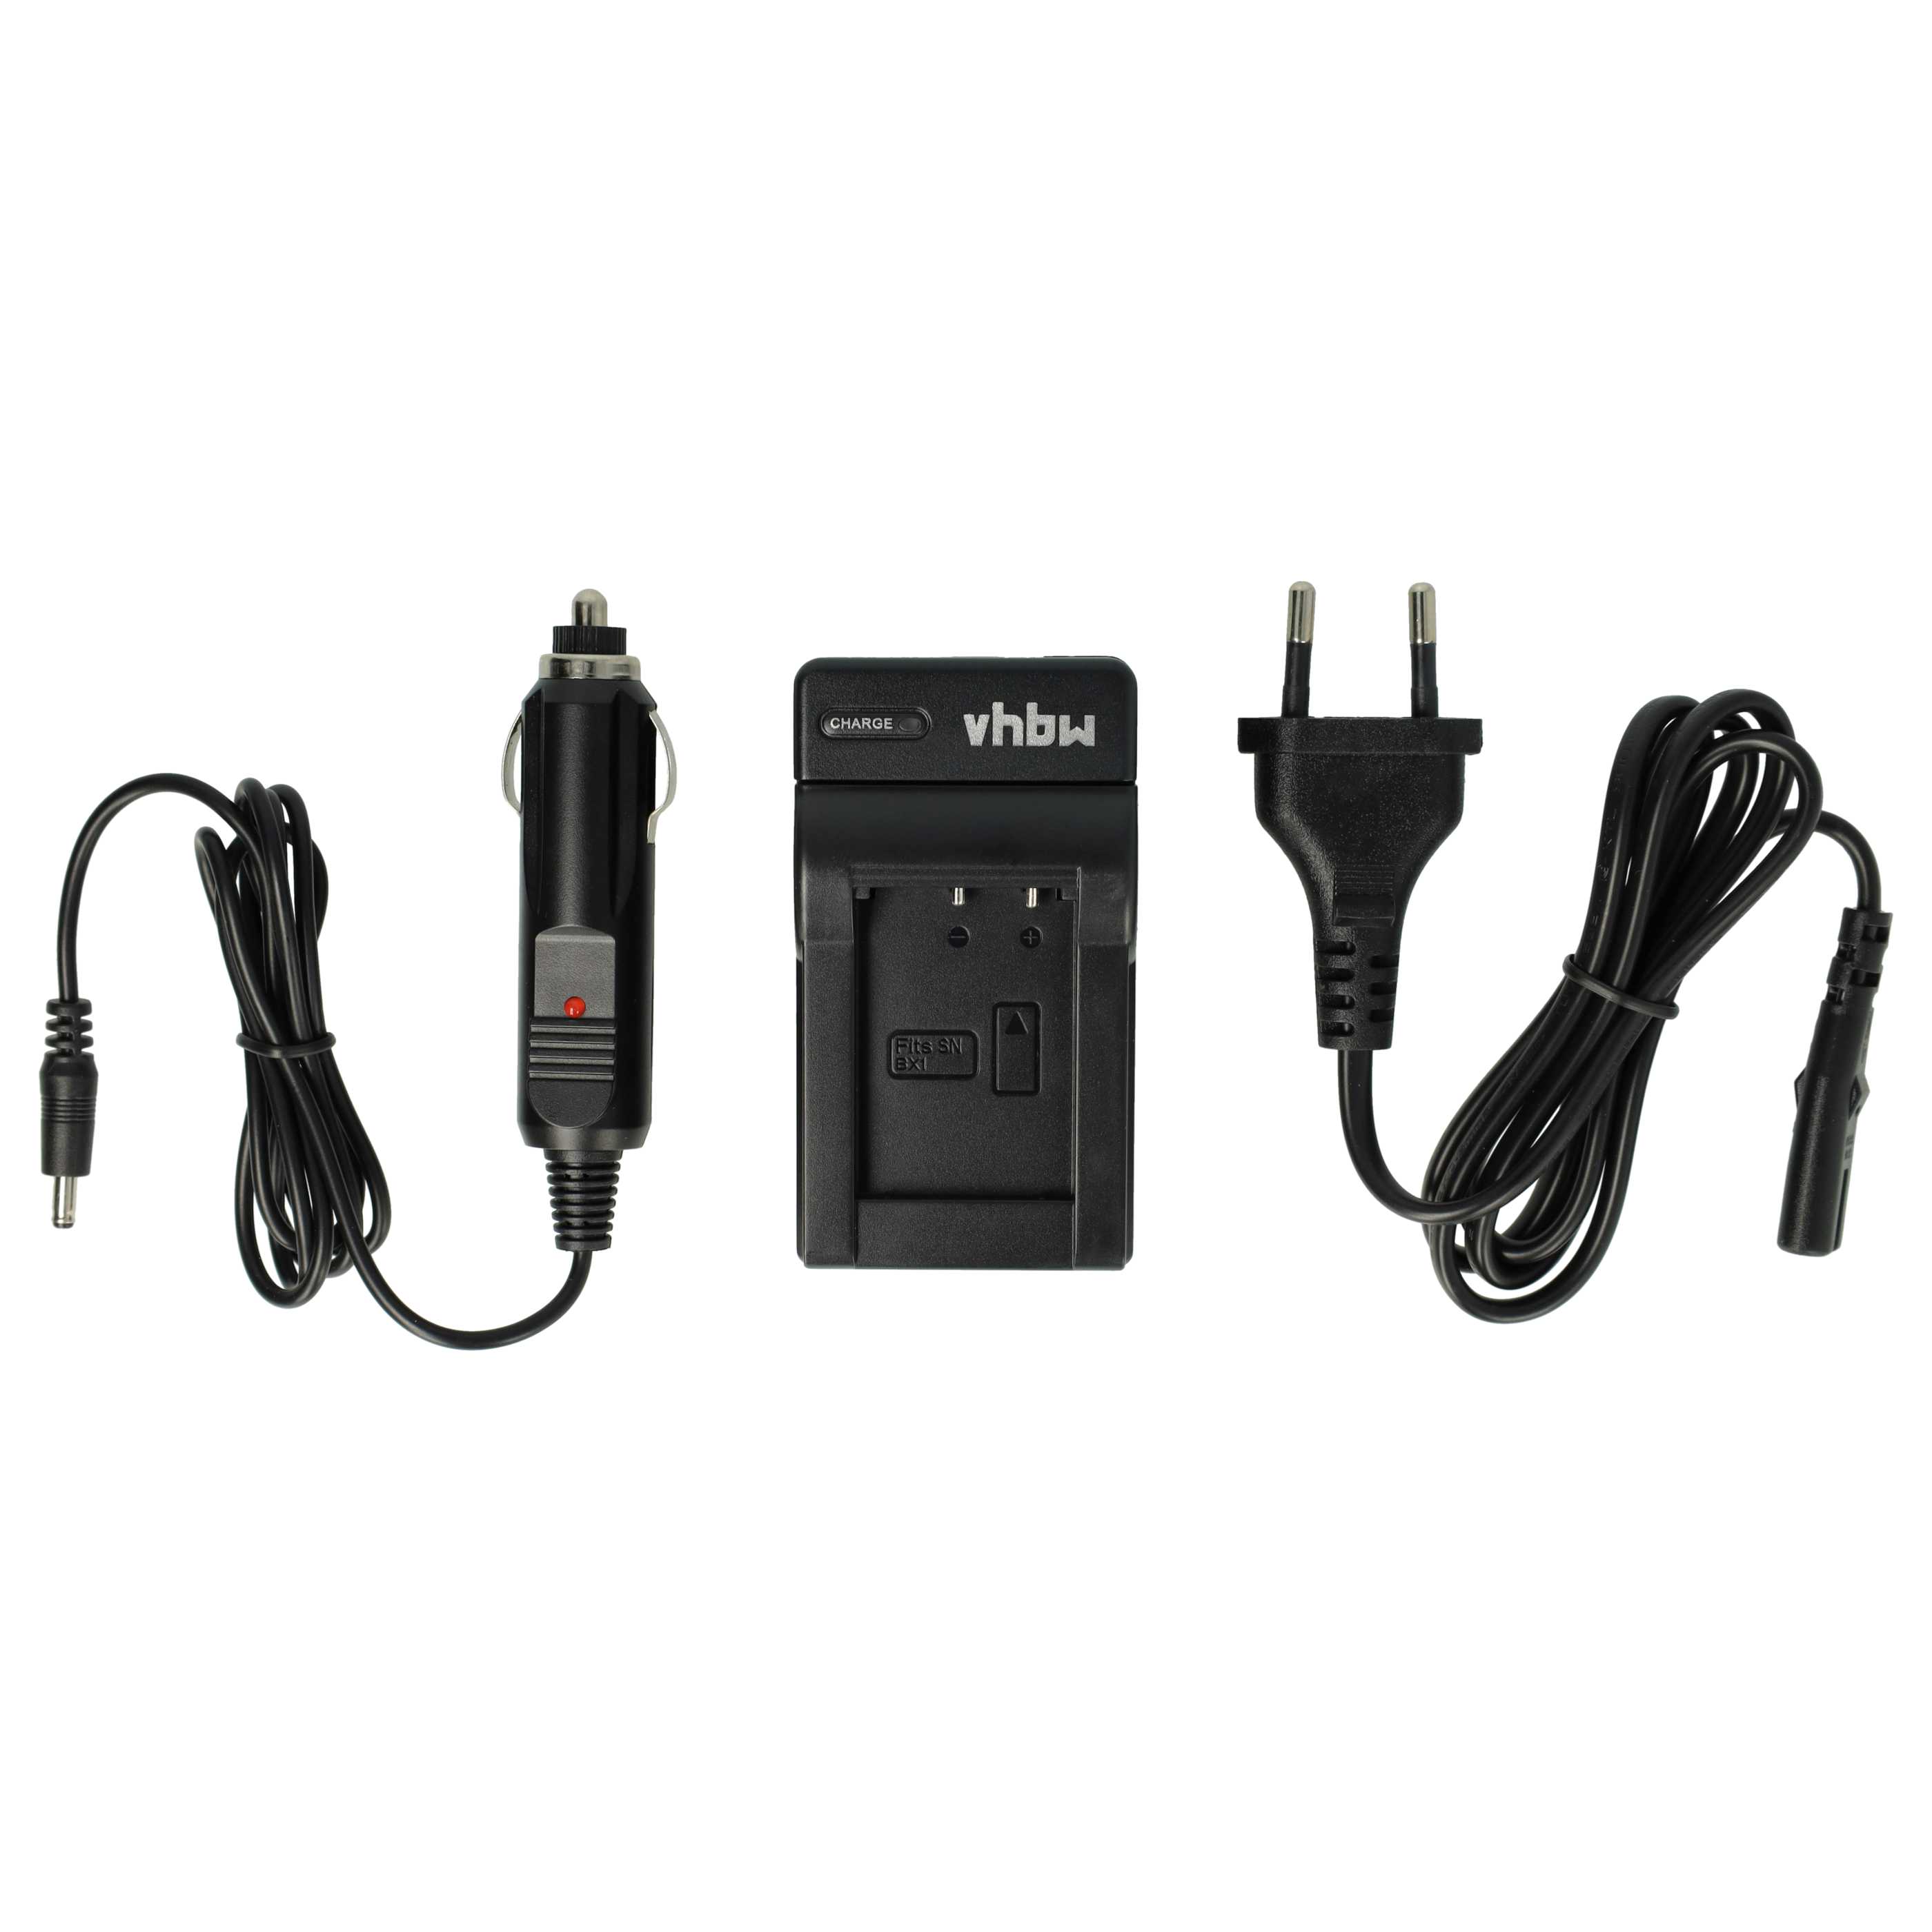 Battery Charger suitable for Sony NP-BX1 Camera etc. - 0.6 A, 4.2 V